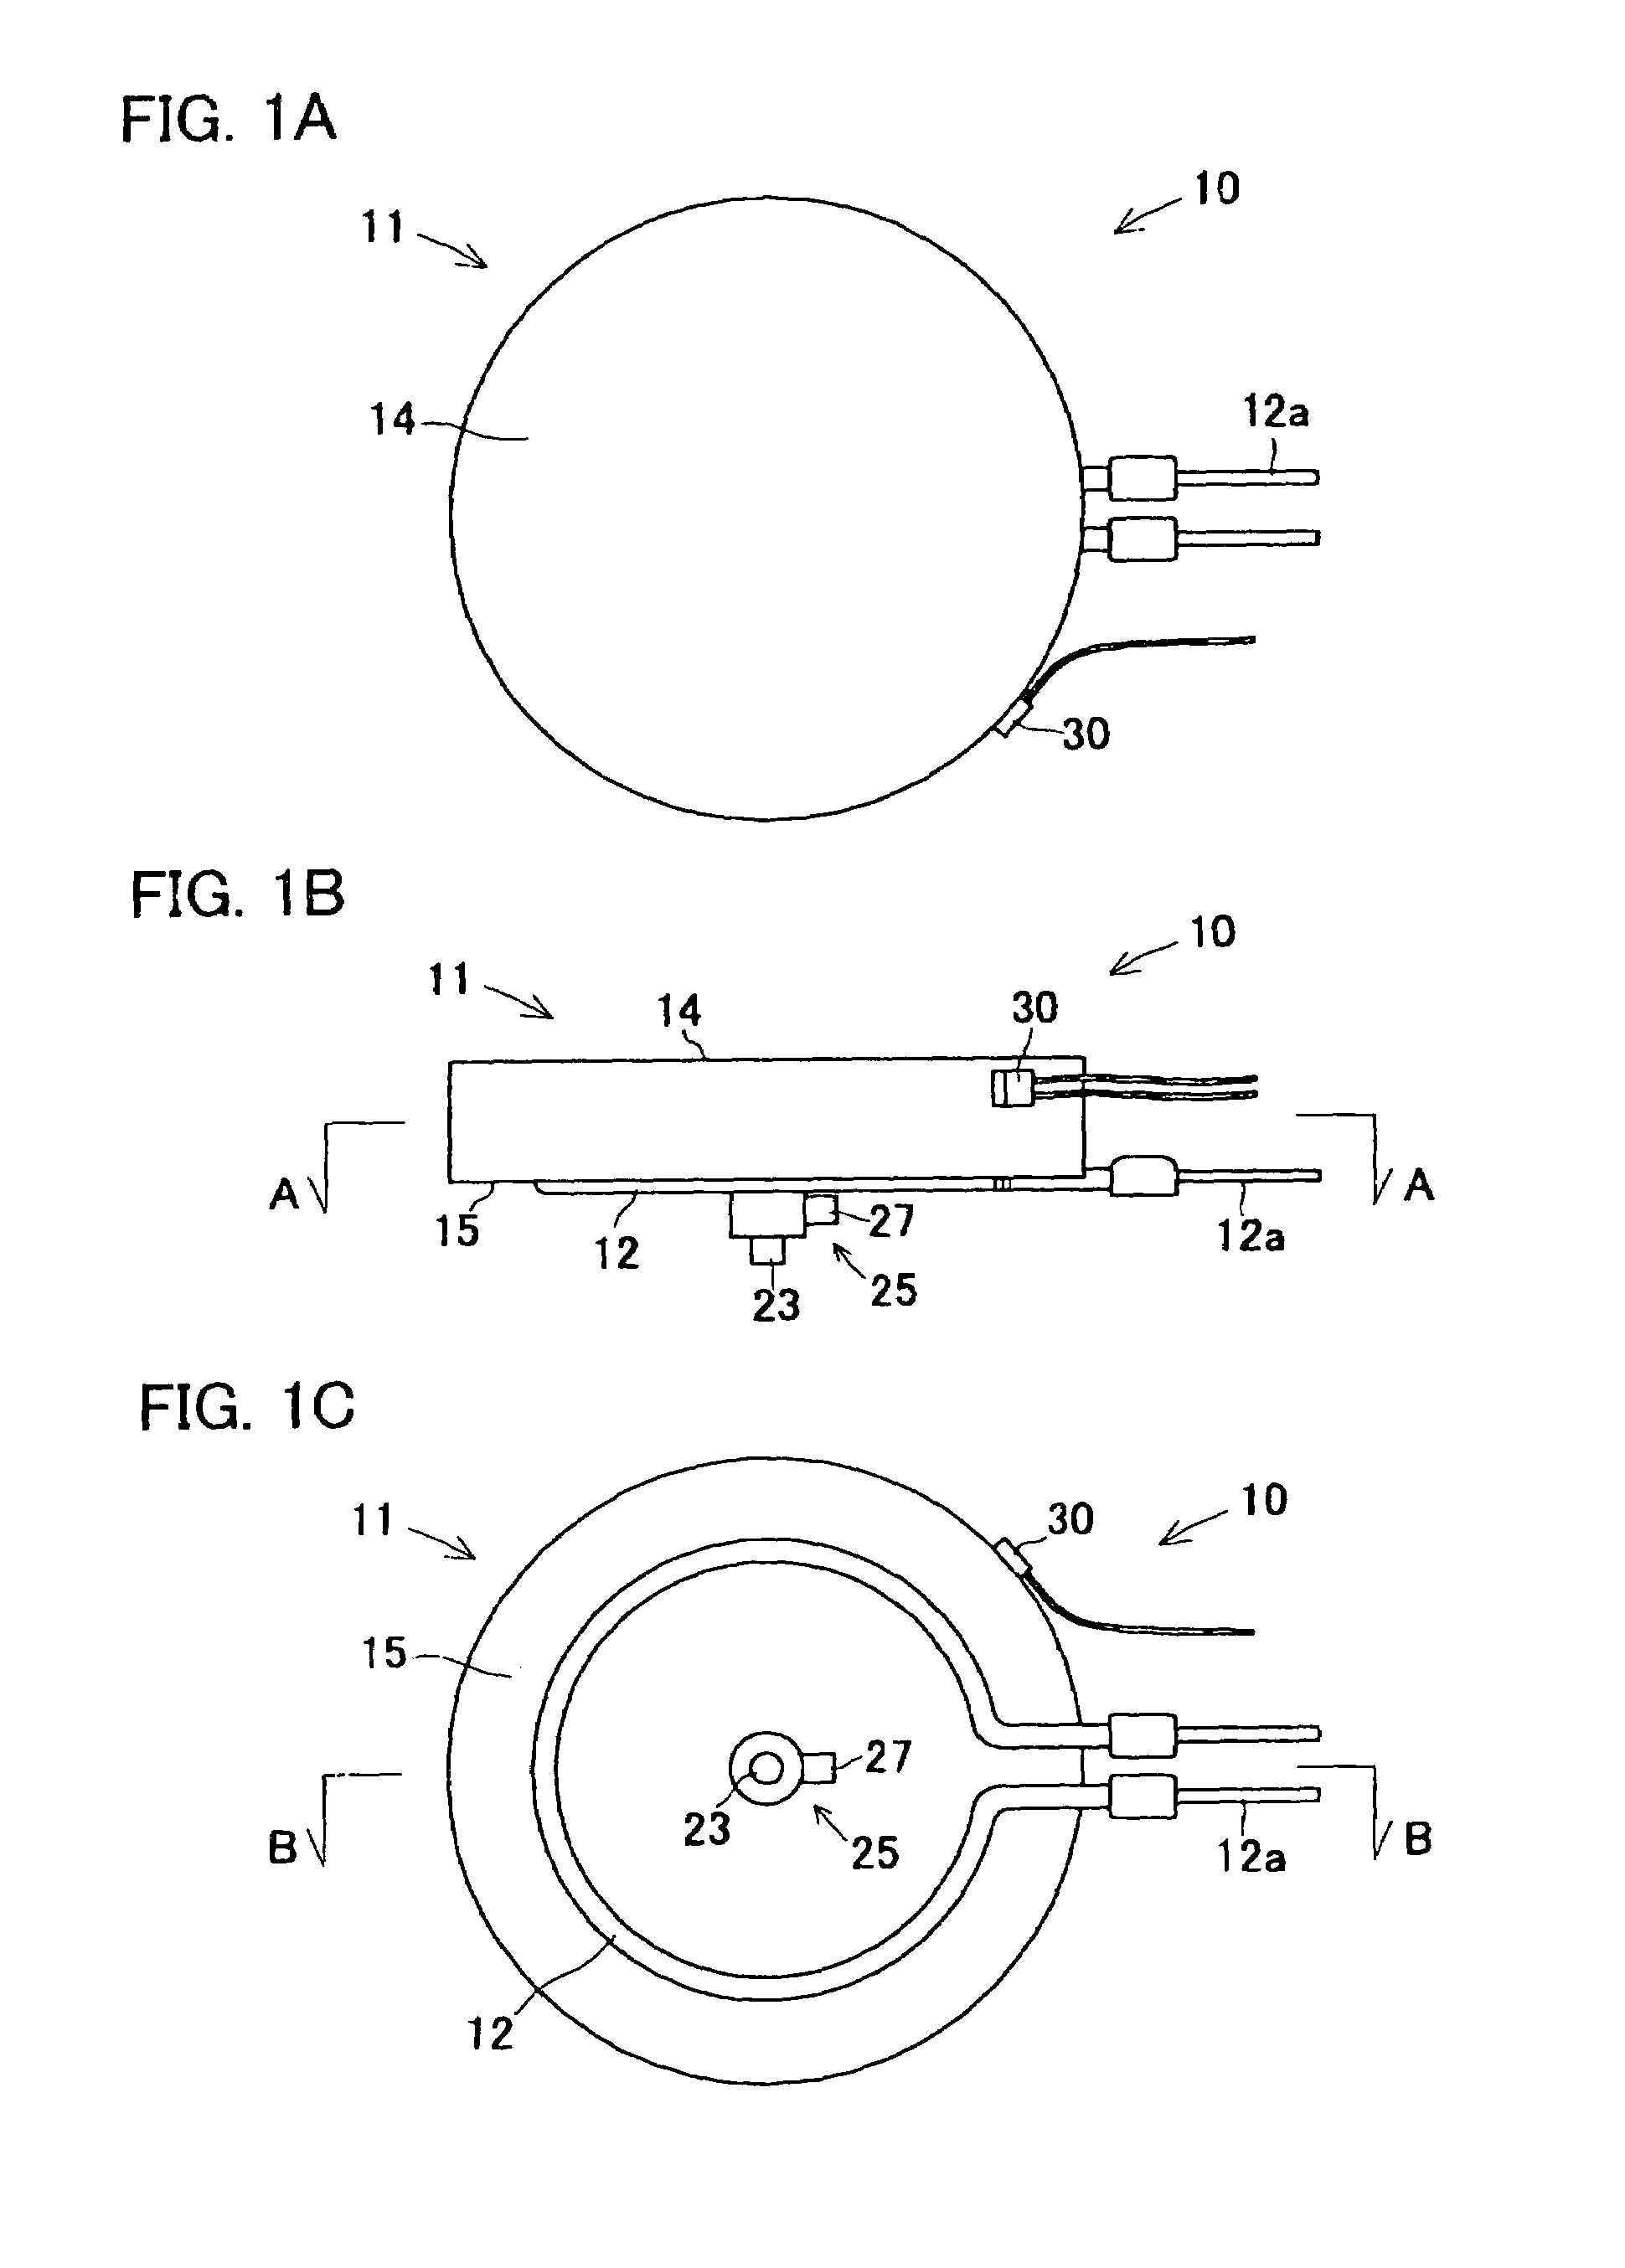 Unit for varying a temperature of a test piece and testing instrument incorporating same